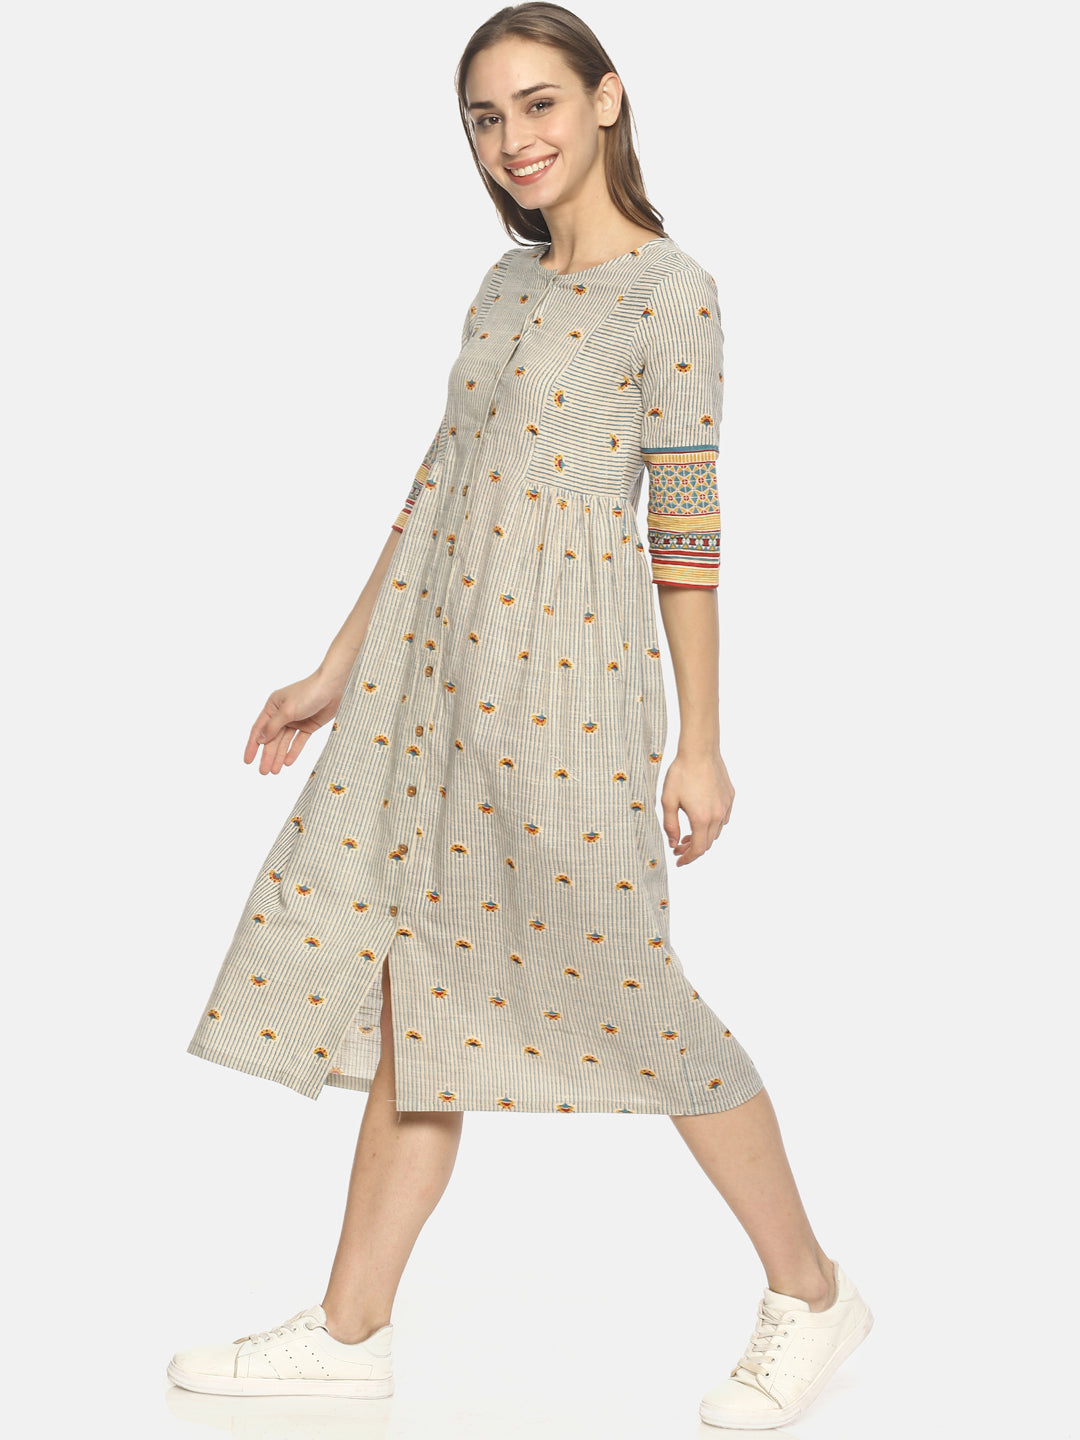 Off White Block Printed Front Open Dress | Untung